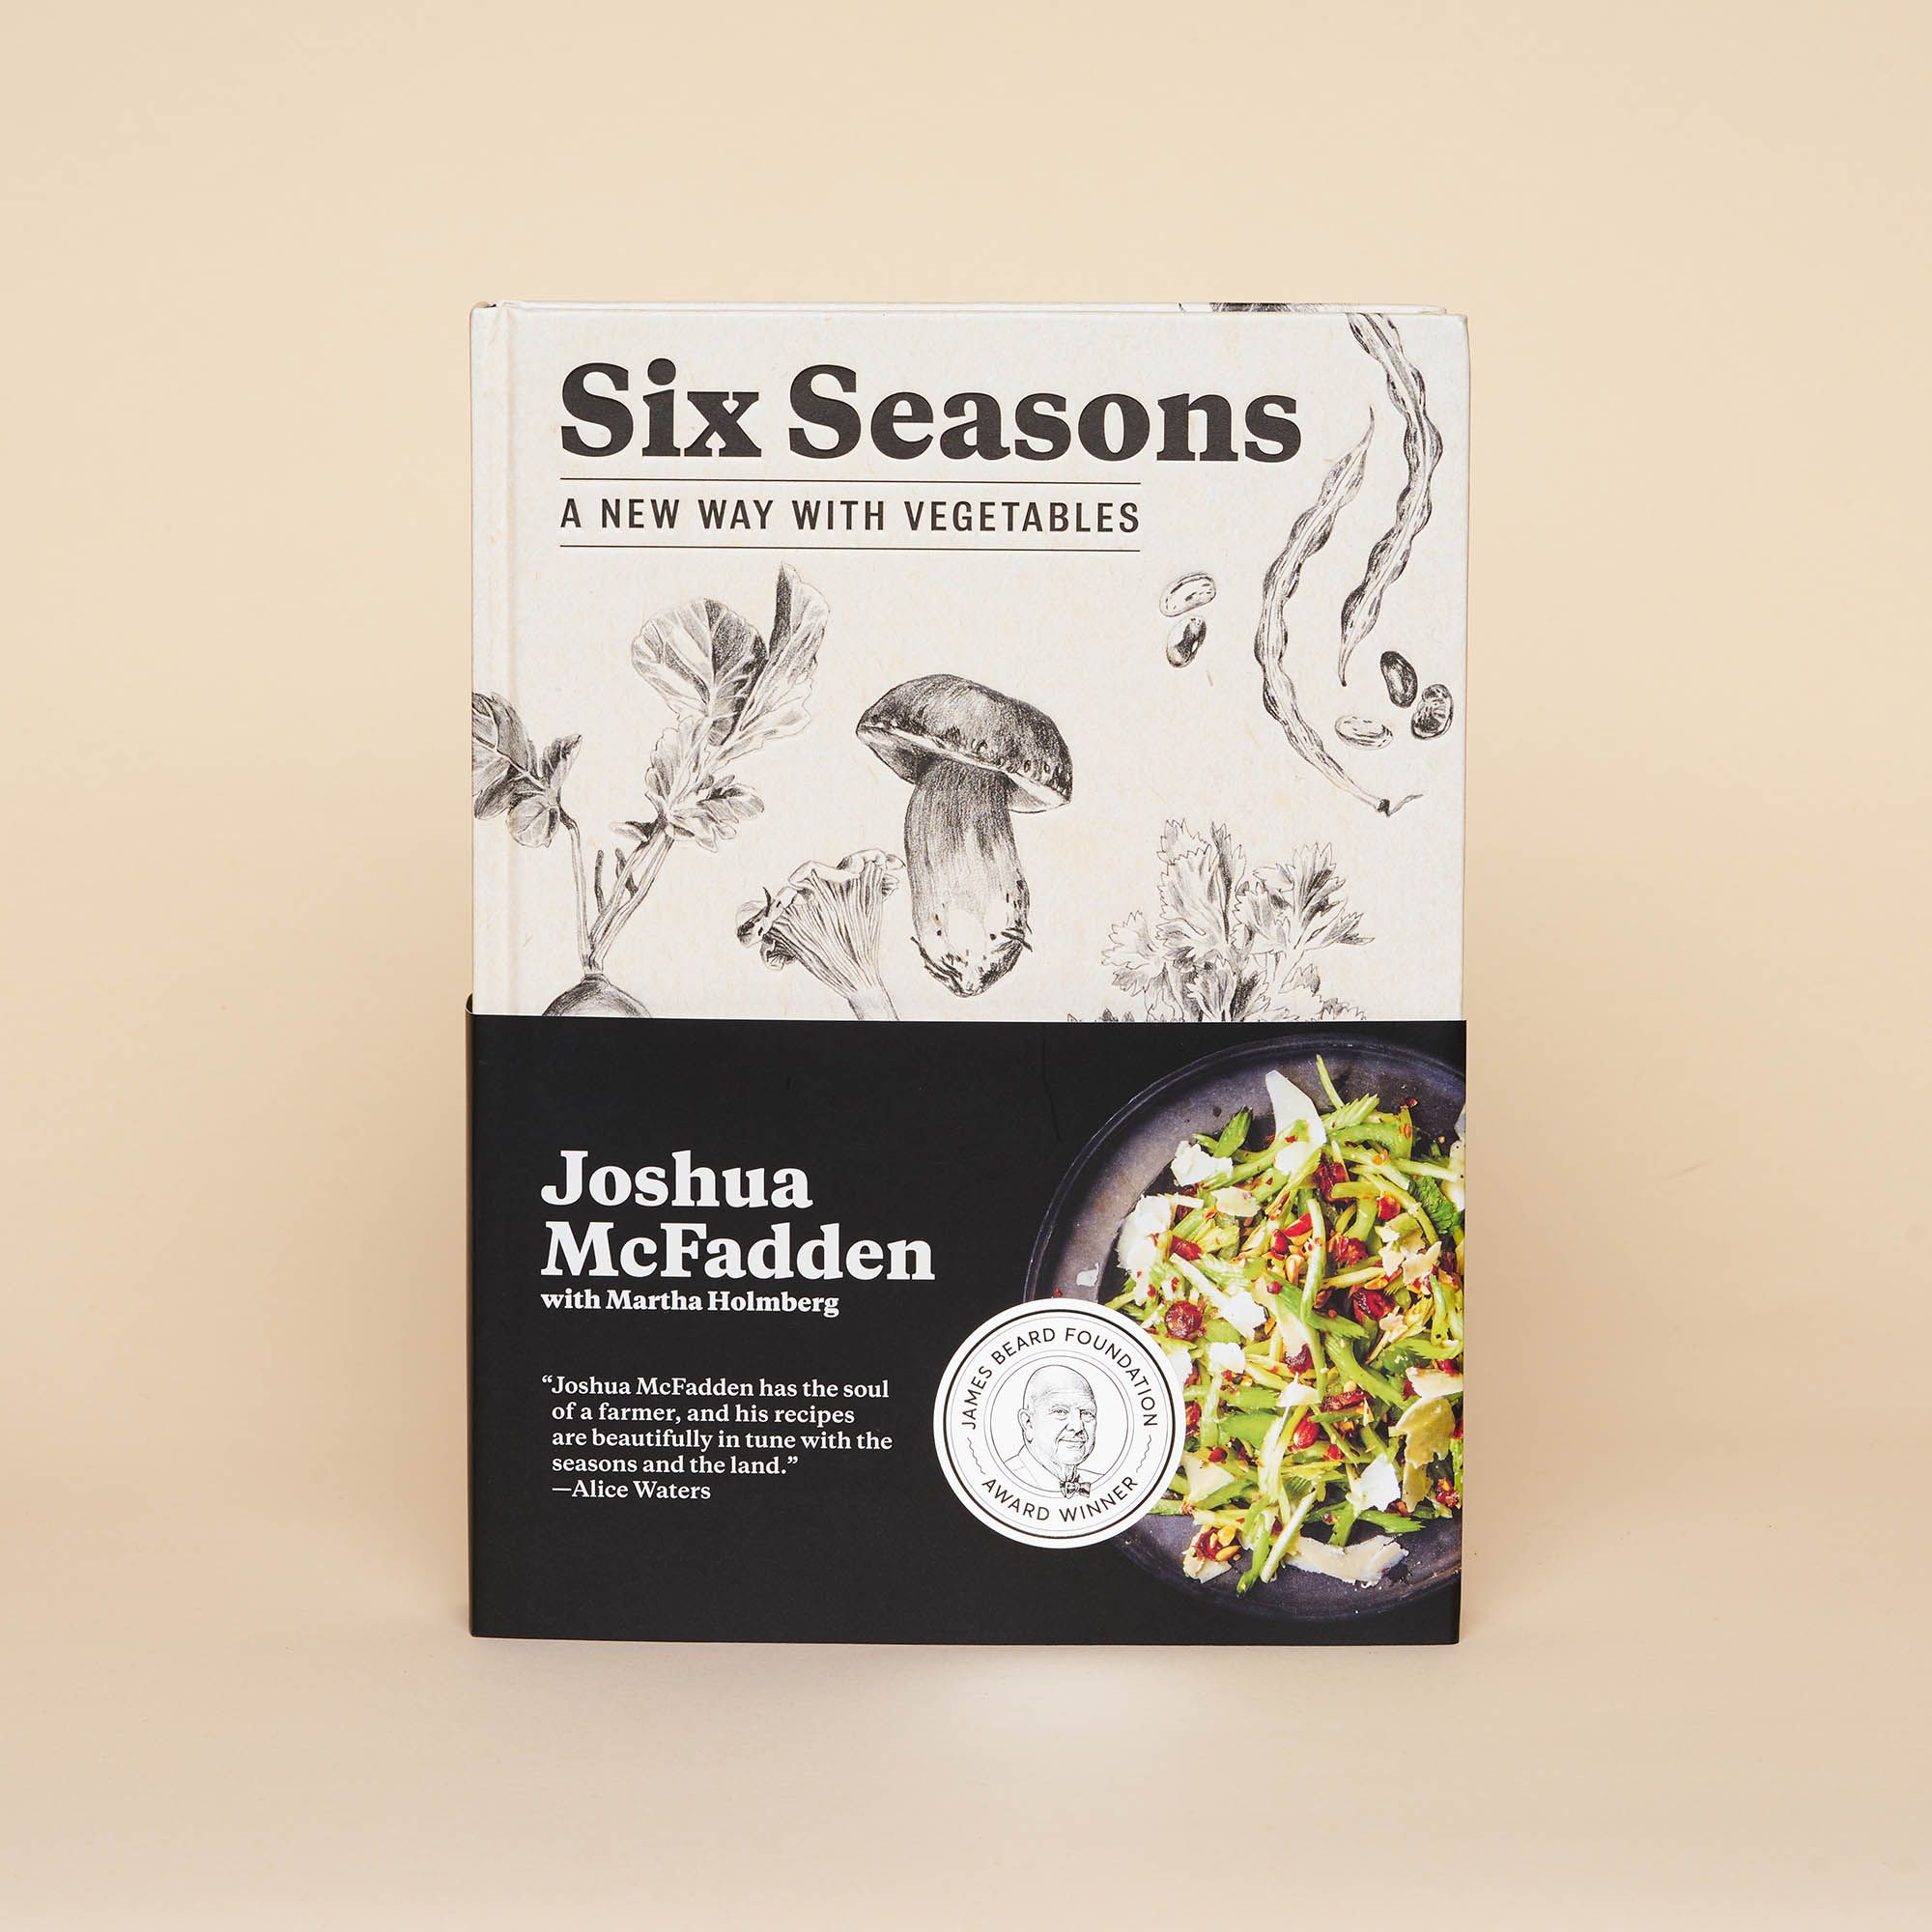 An off-white cookbook with delicate illustrations of beets, onions, mushrooms, green beans and celery. A half-book size removable sleeve is over the book, showing a colorful salad and James Beard Award Winner stamp.